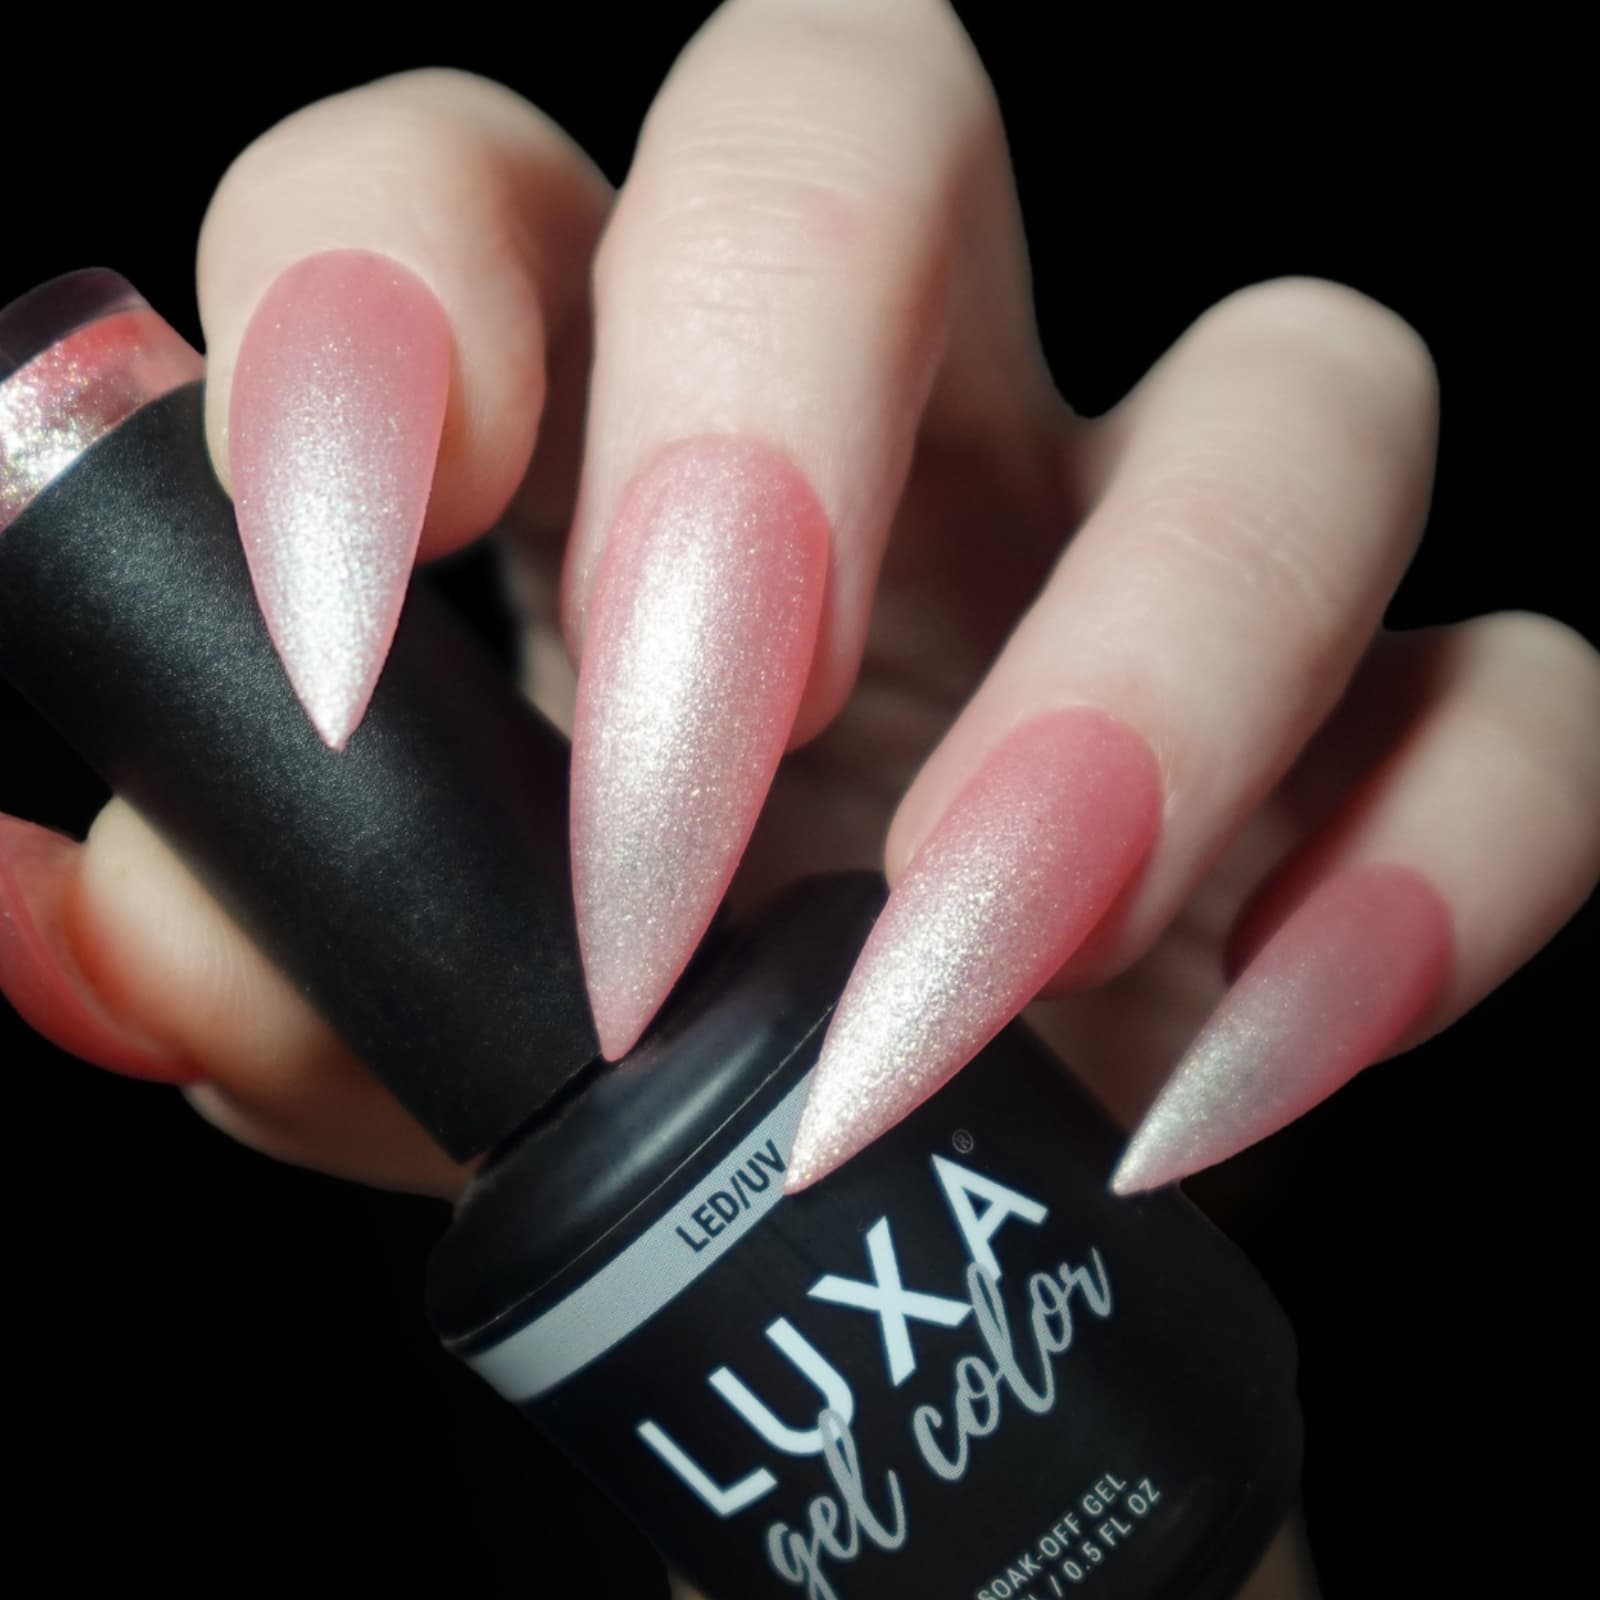 Luxapolish Pink Champagne